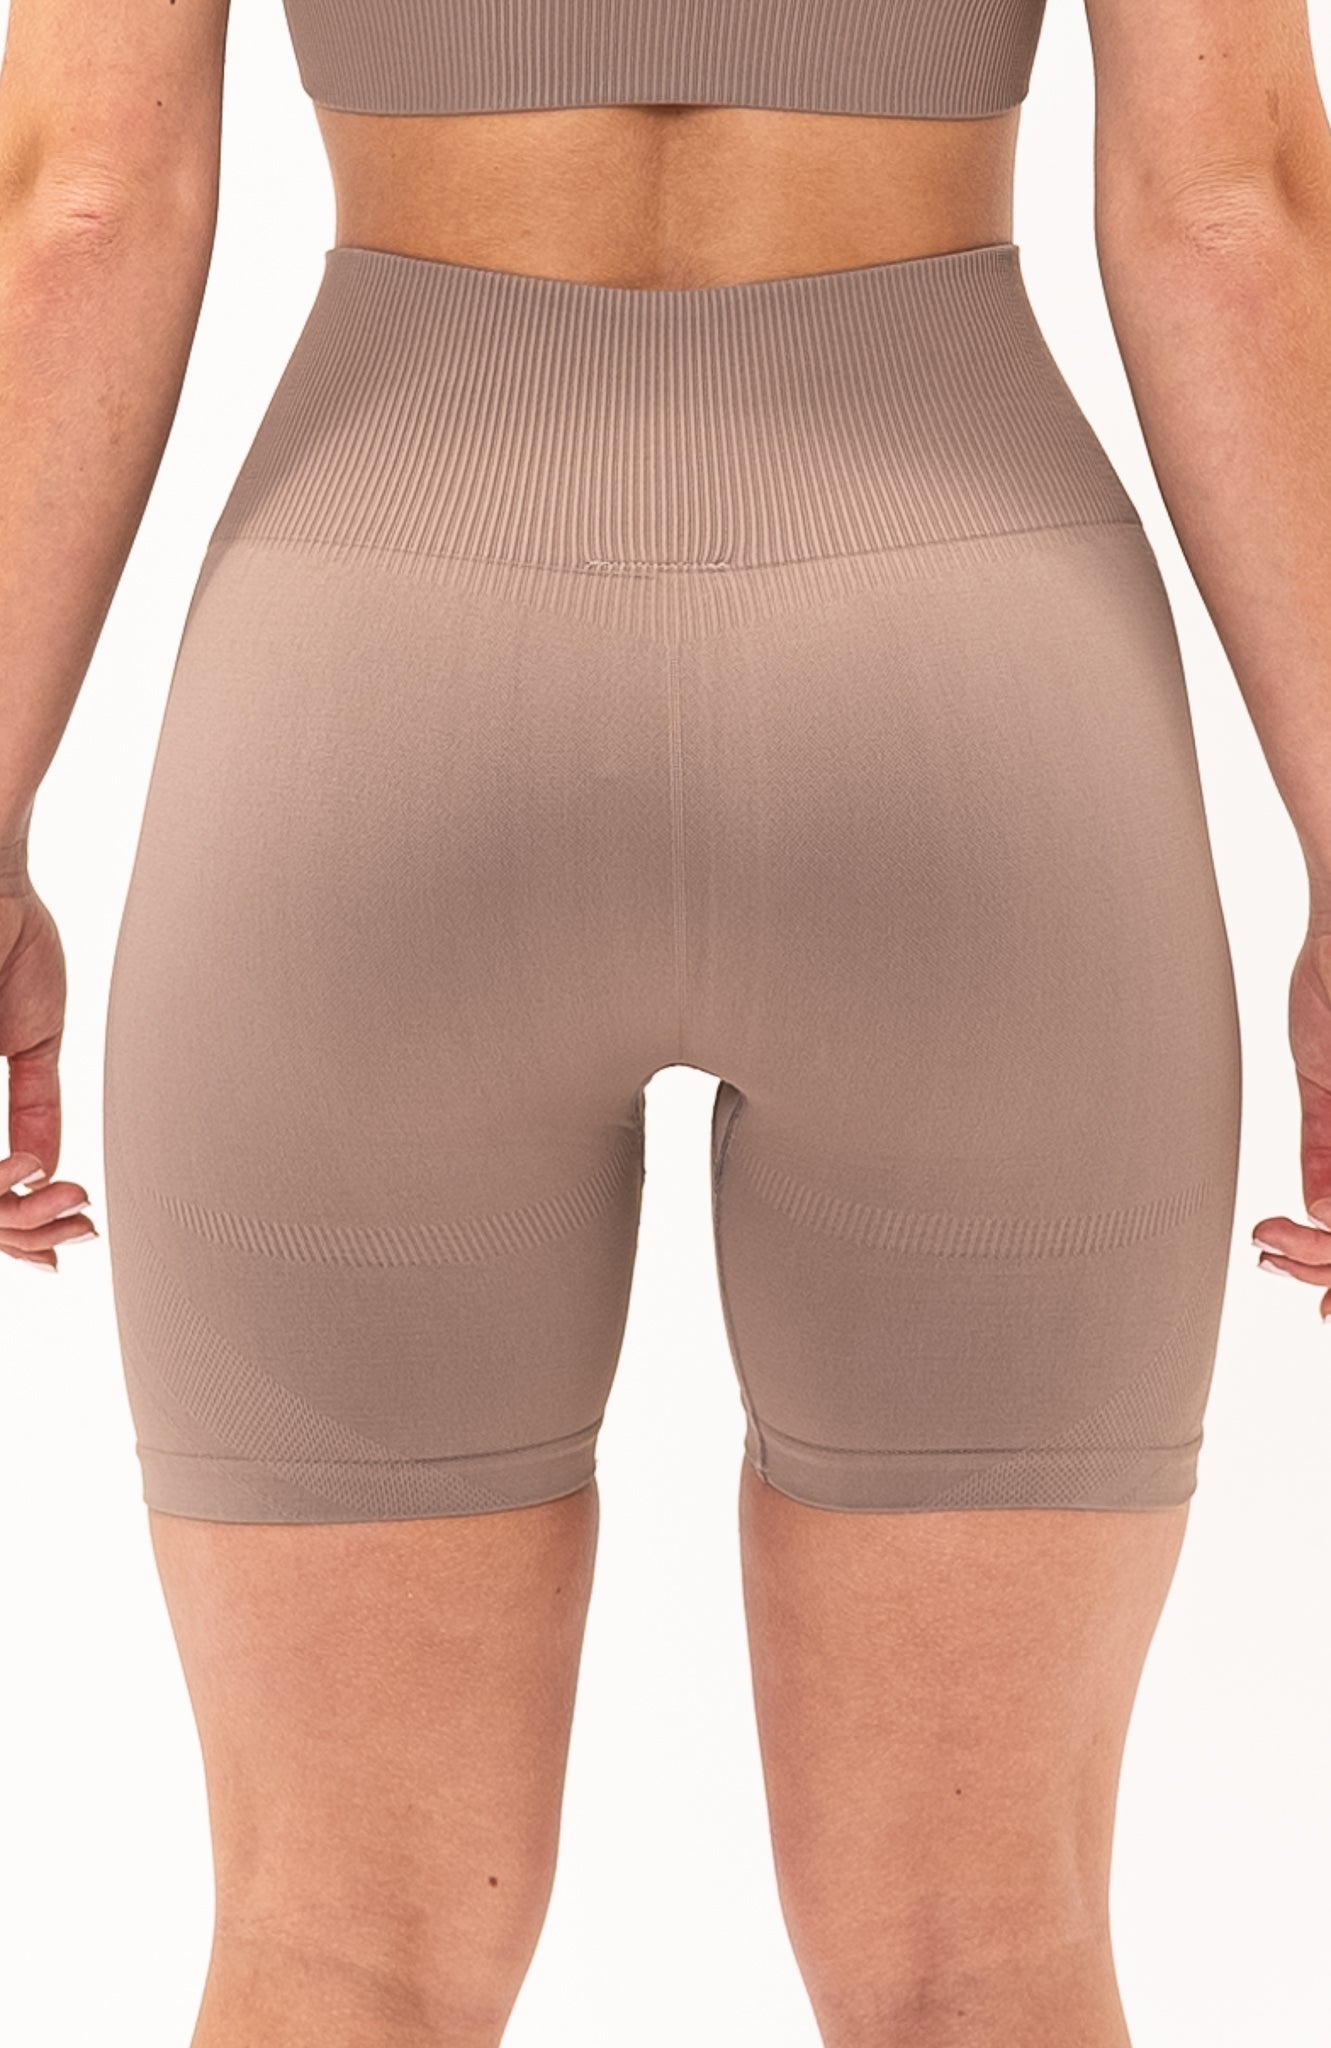 redbaysand Women's seamless Limitless high waisted cycle shorts in fawn – Squat proof 5 inch inseam leg bum enhancing shorts for Gym workouts training, Running, yoga, bodybuilding and bikini fitness.